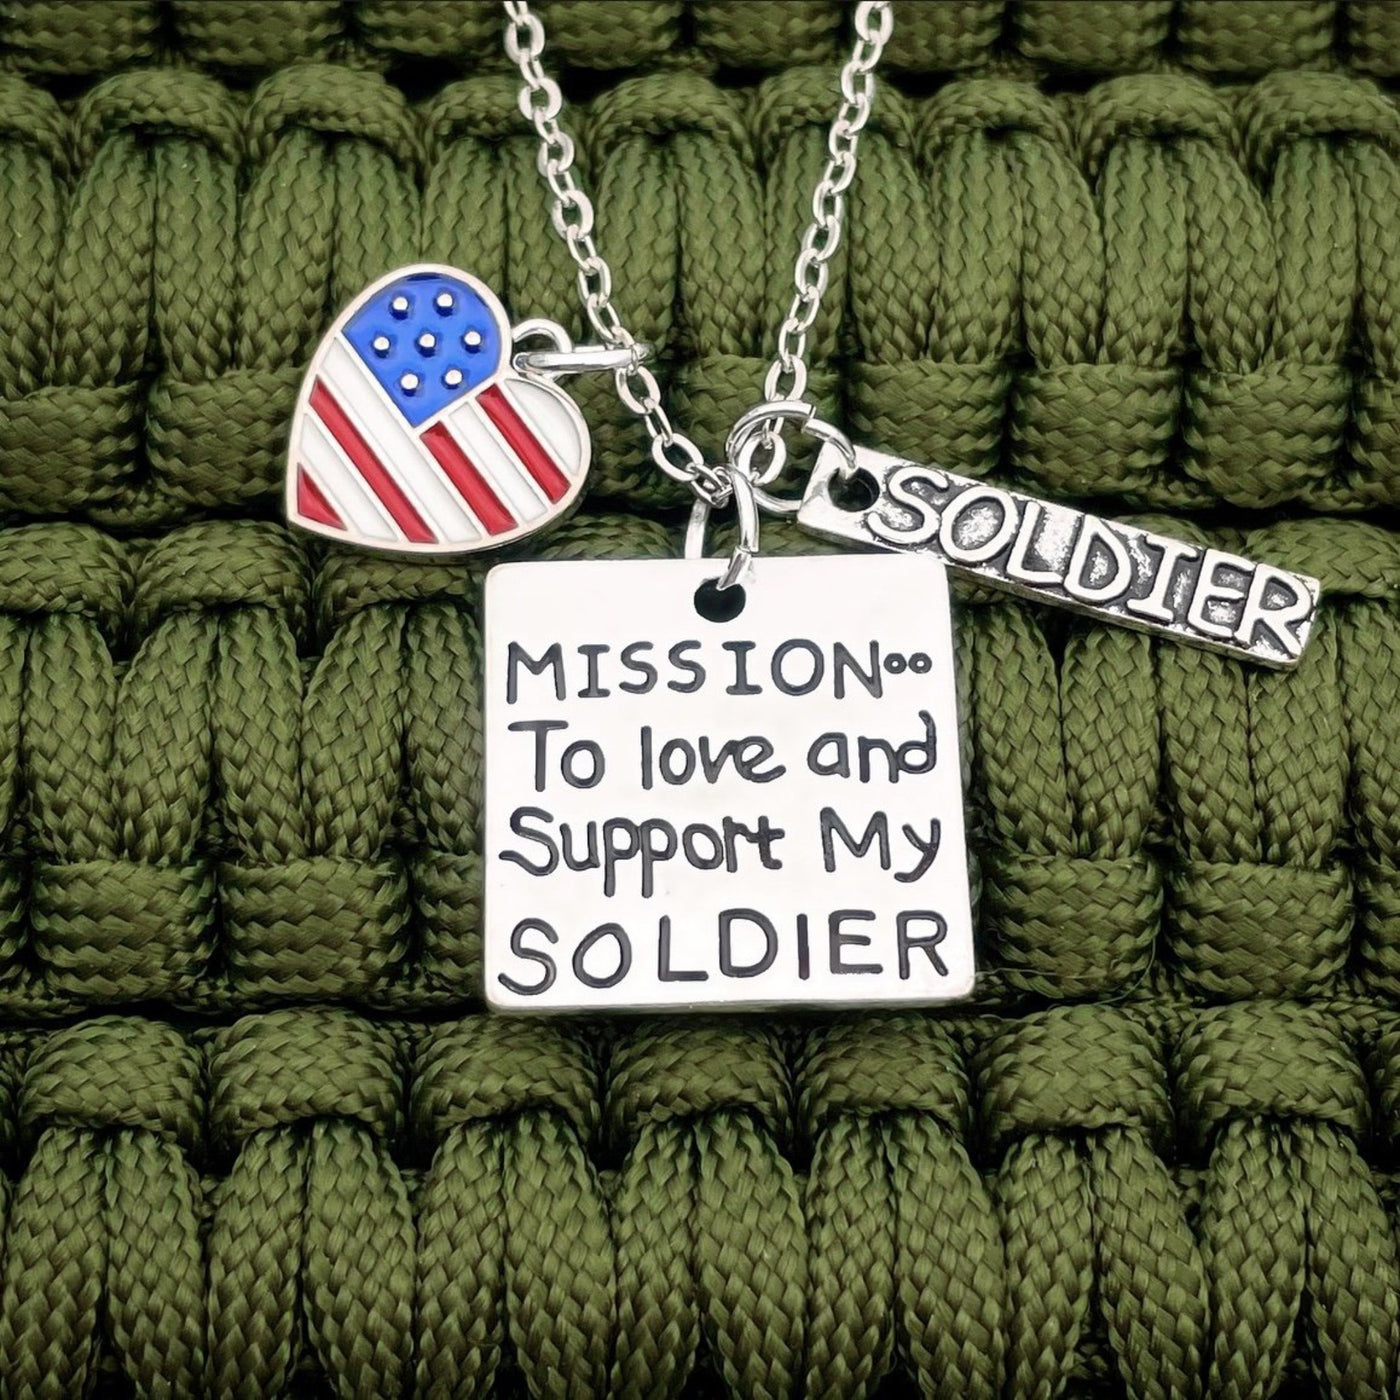 Love and Support My Soldier Necklace